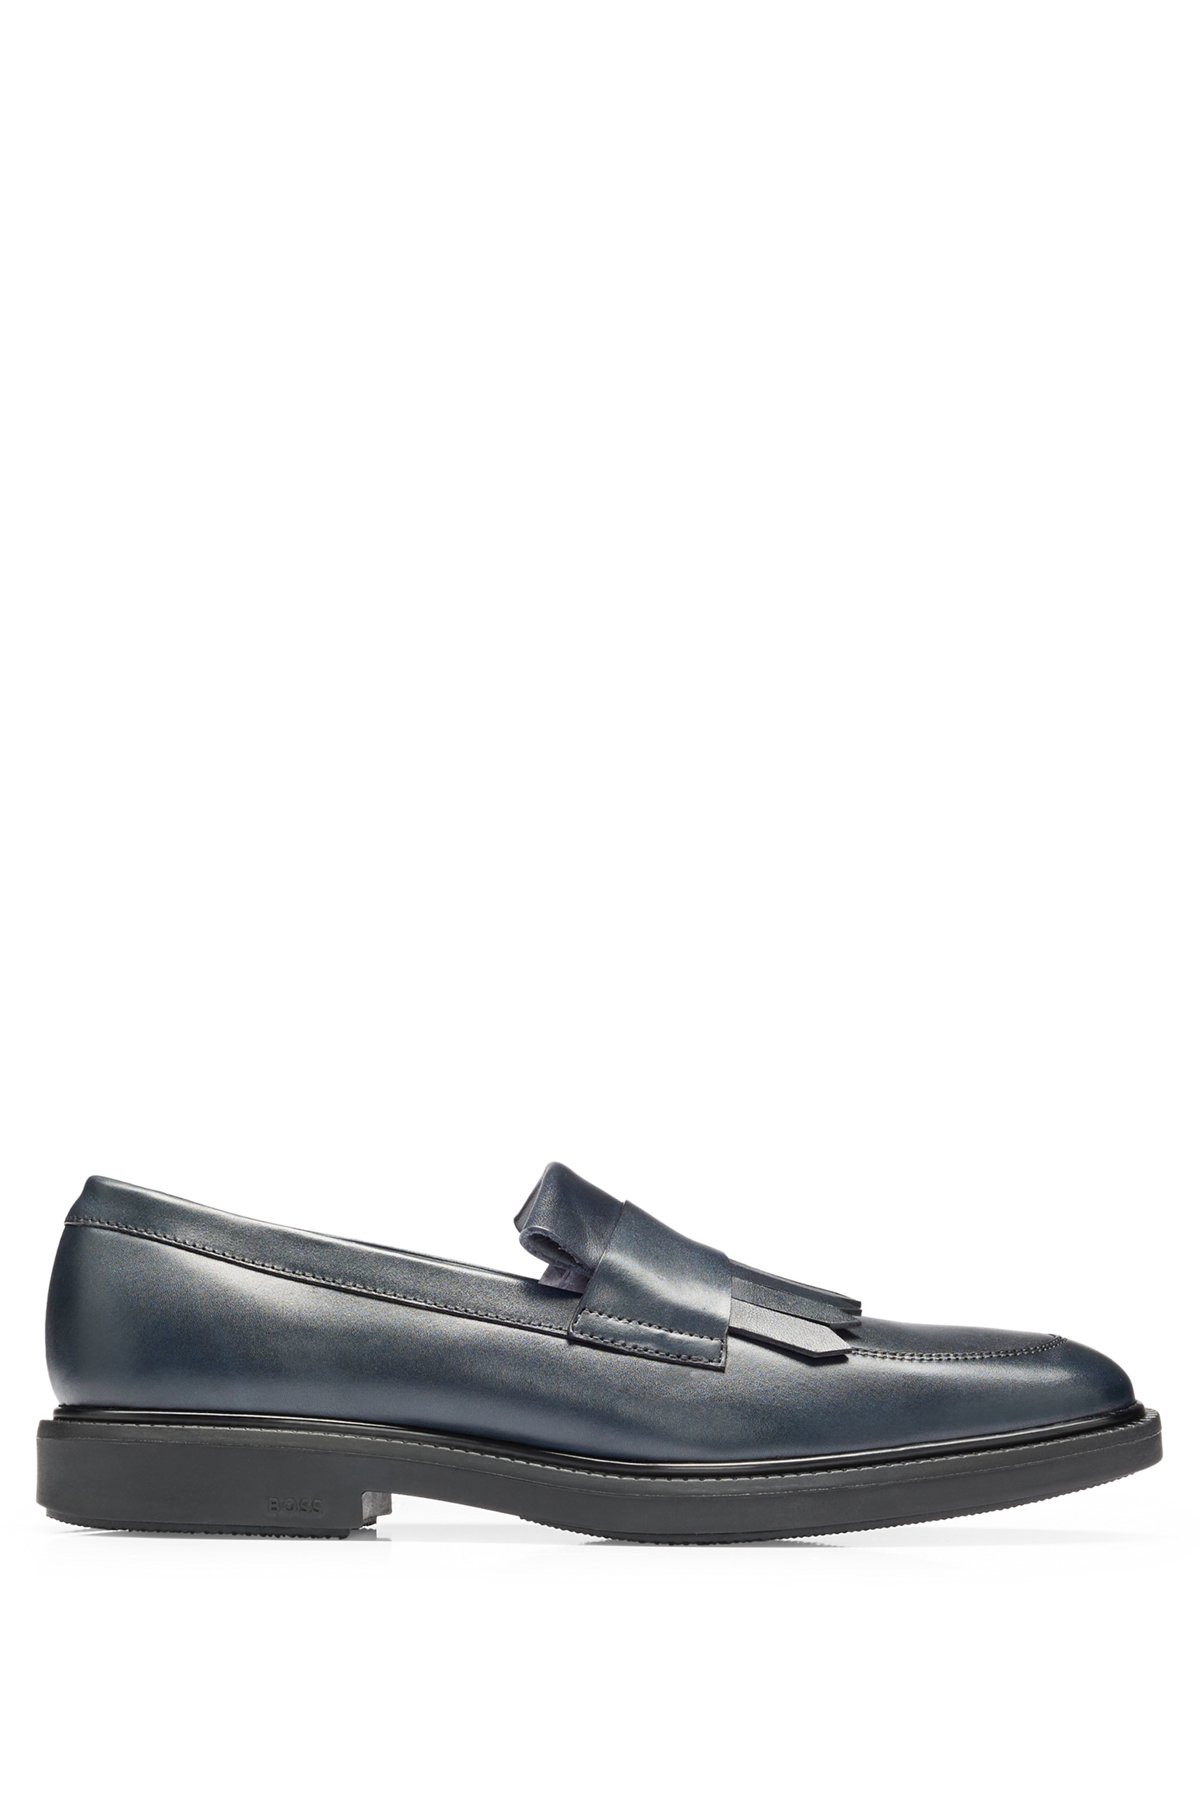 Apron-toe loafers in leather with fringe trim, Dark Blue